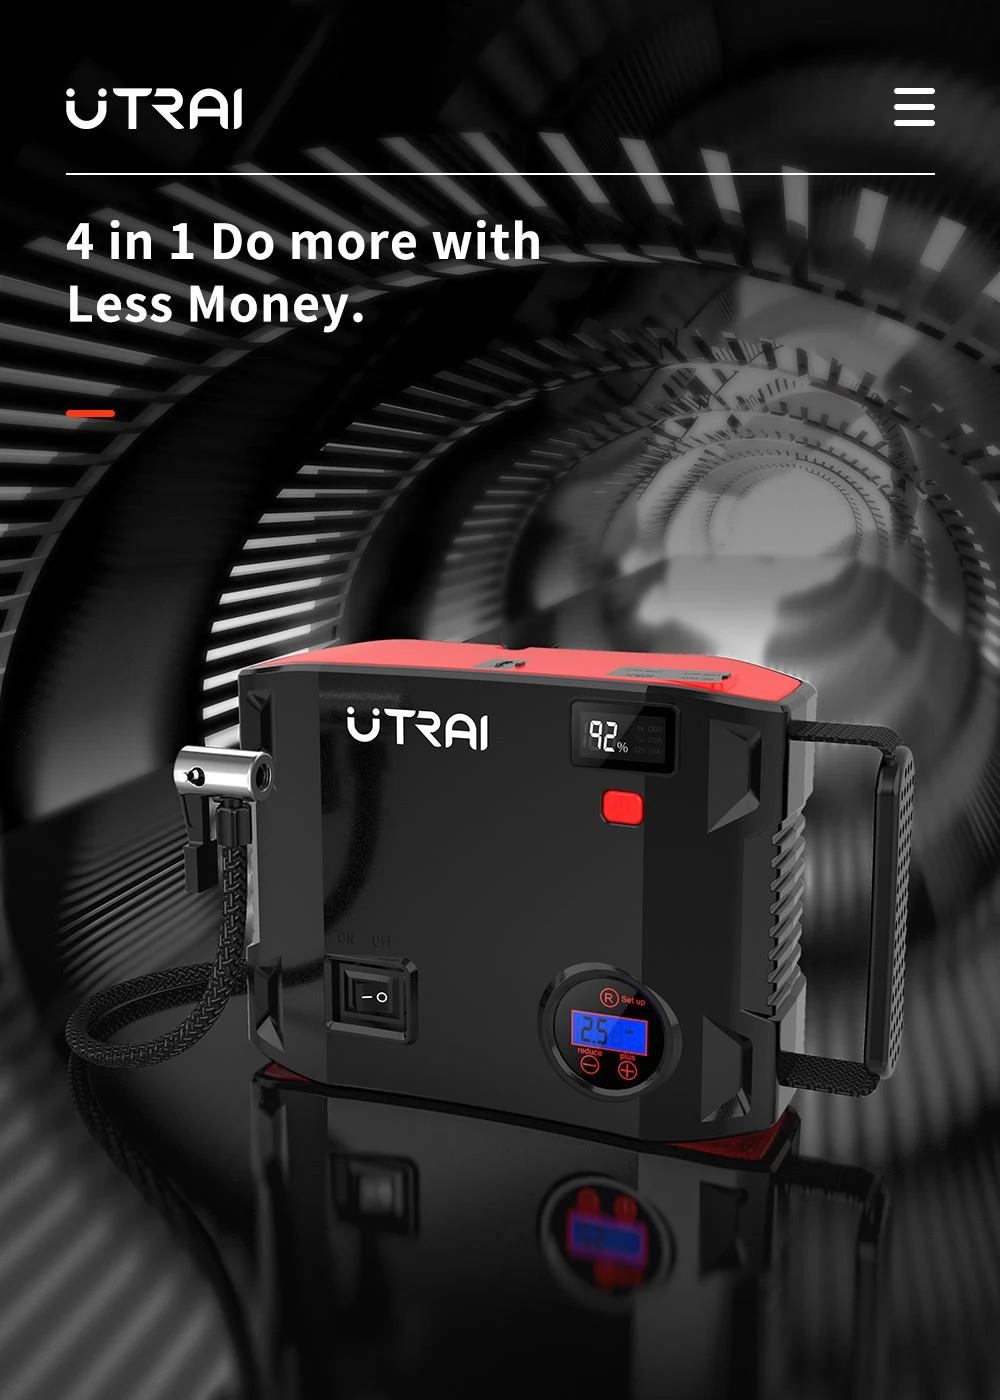 UTRAI Jstar 5 24000mAh 2000A 4-in-1 Car Jump Starter with 150 PSI Air  Compressor Dual Display Start Up To 8.0 L GAS 7.5 L DIESEL 